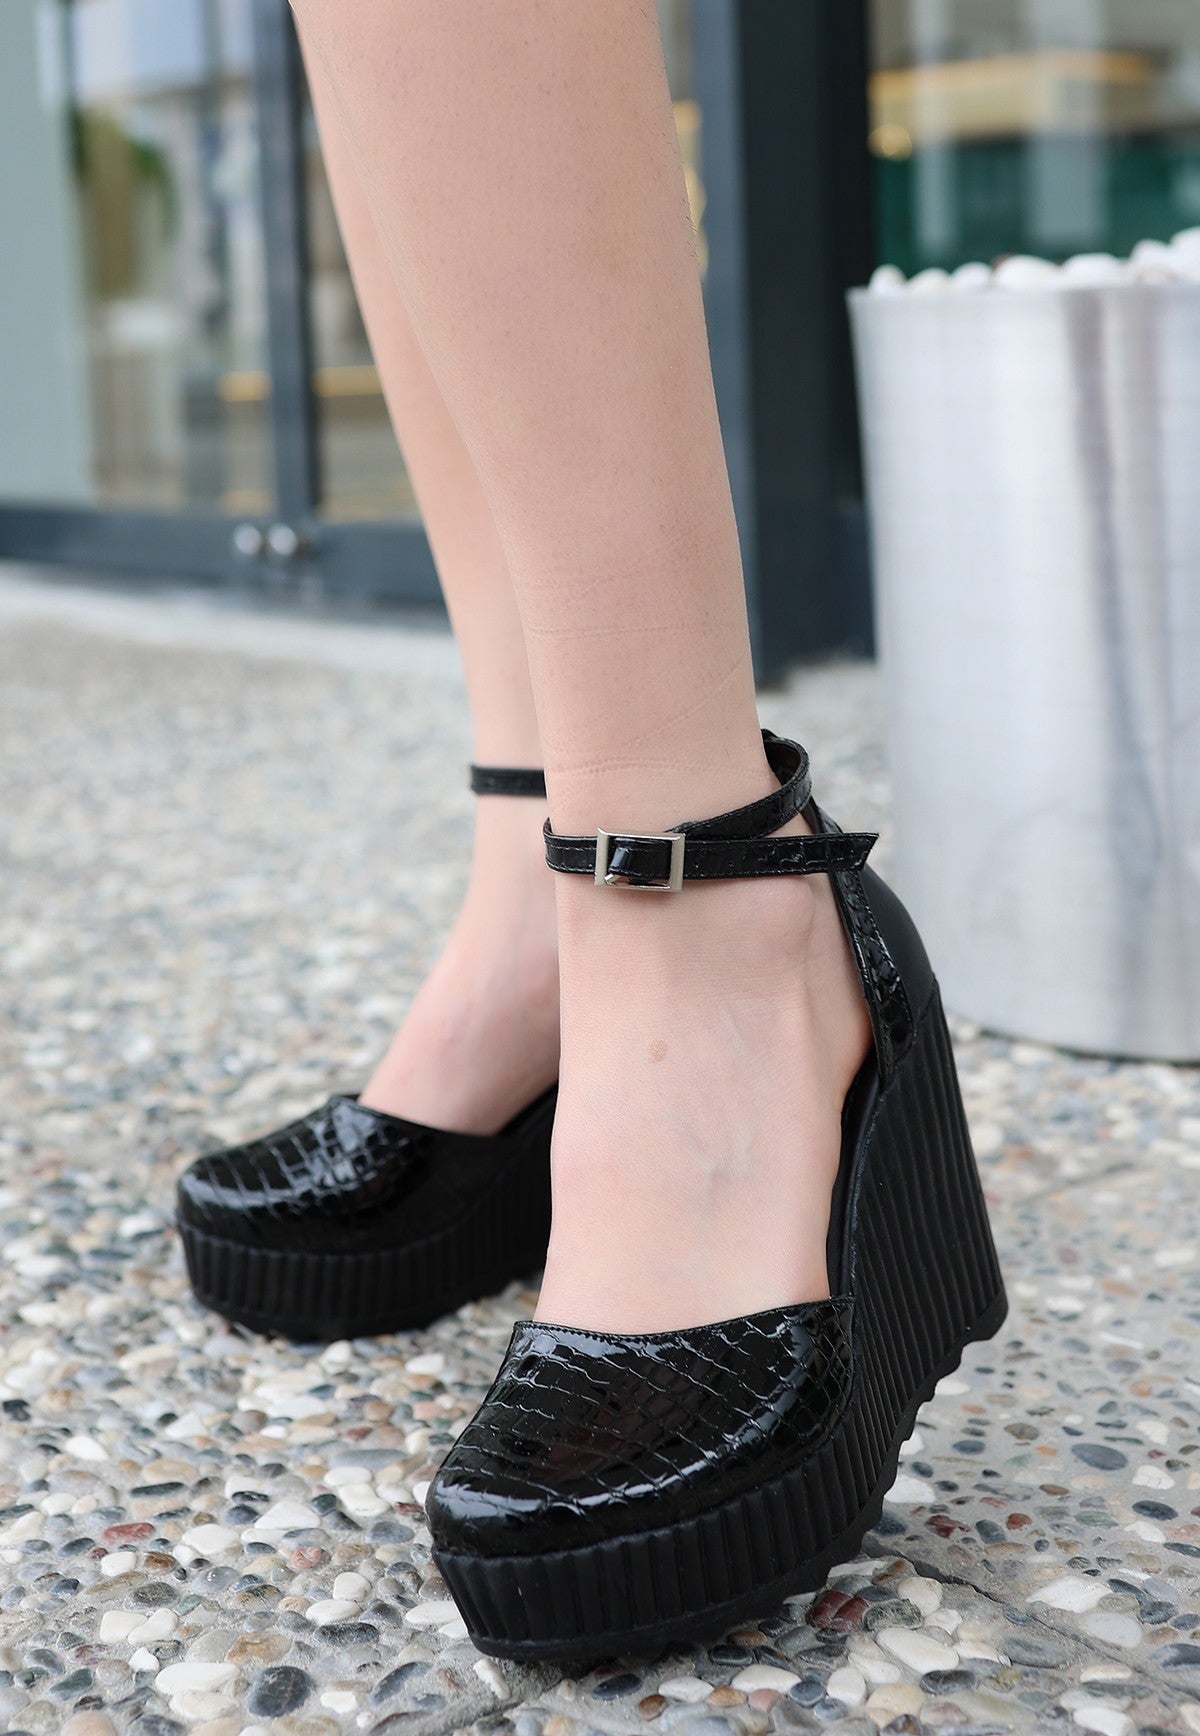 Women's Black Patent Leather Wedge Heel Shoes - STREETMODE™